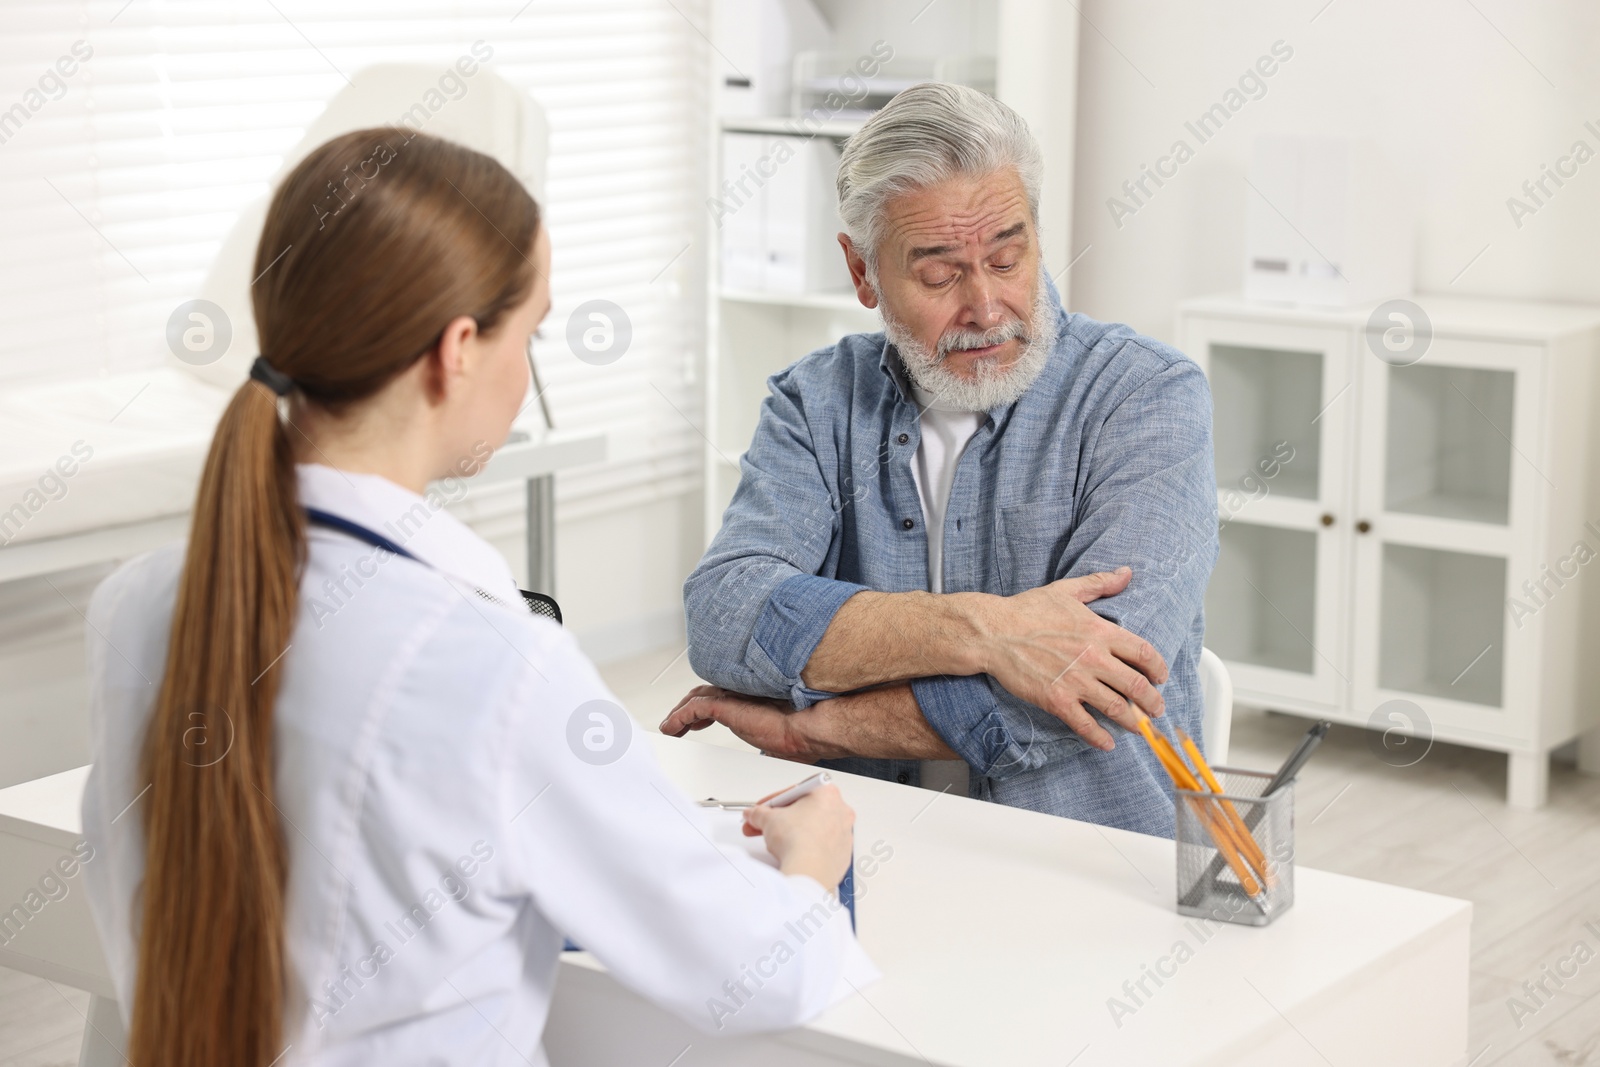 Photo of Arthritis symptoms. Doctor consulting patient with elbow pain in hospital